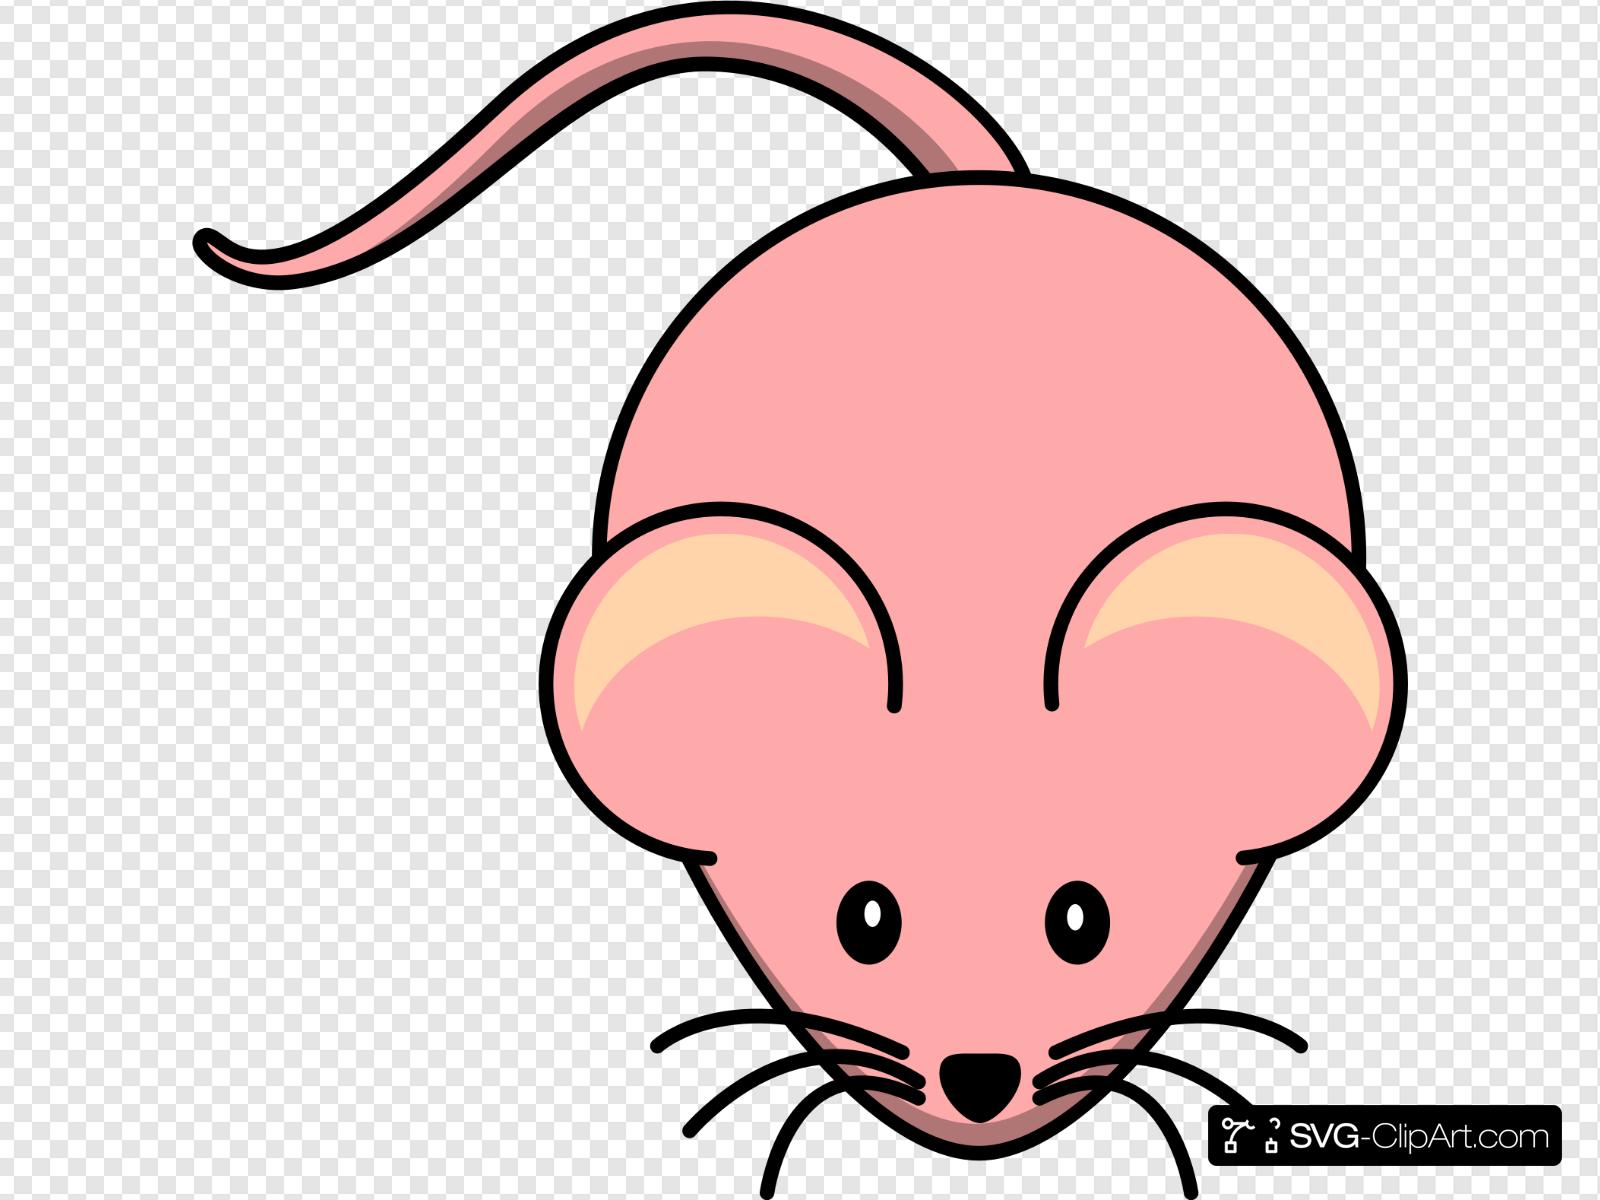 Pinky mouse clip.